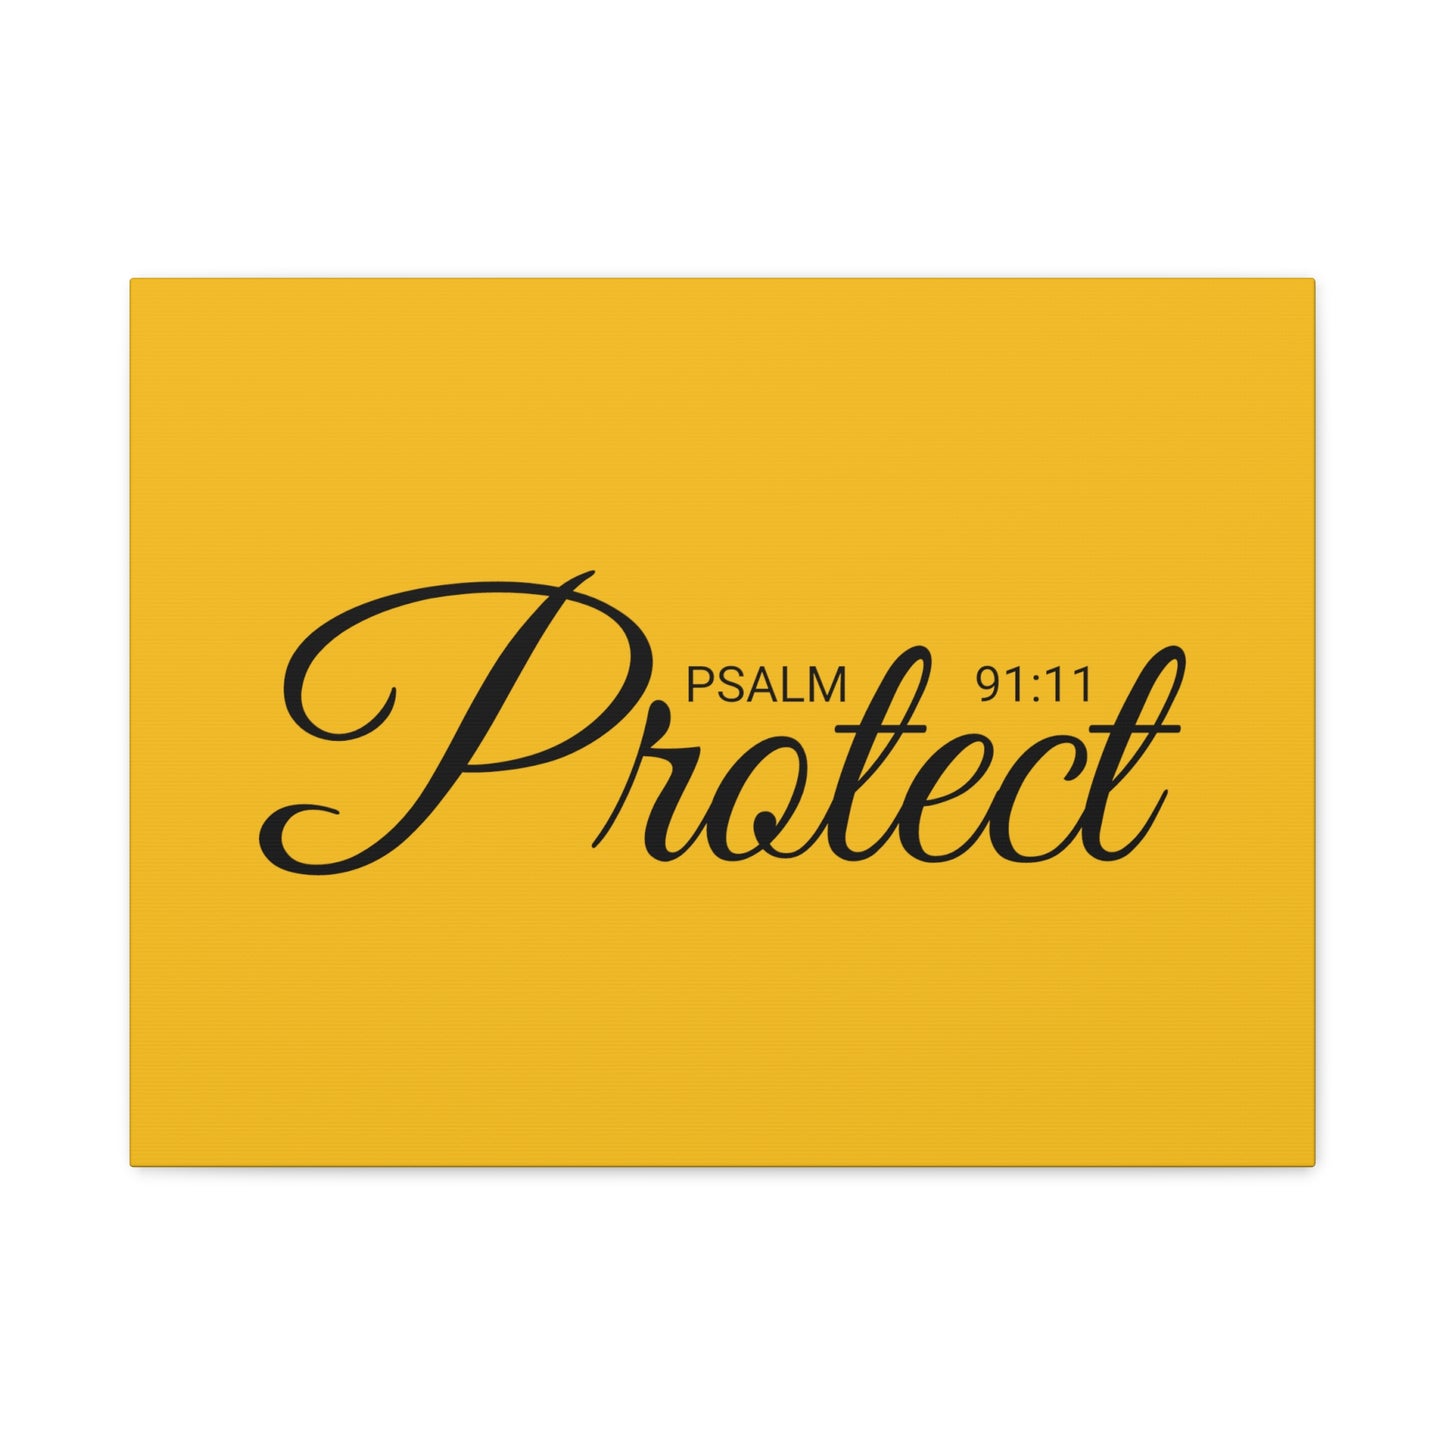 Christian Wall Art "Protect" Psalm 91:11 Ready to Hang Unframed